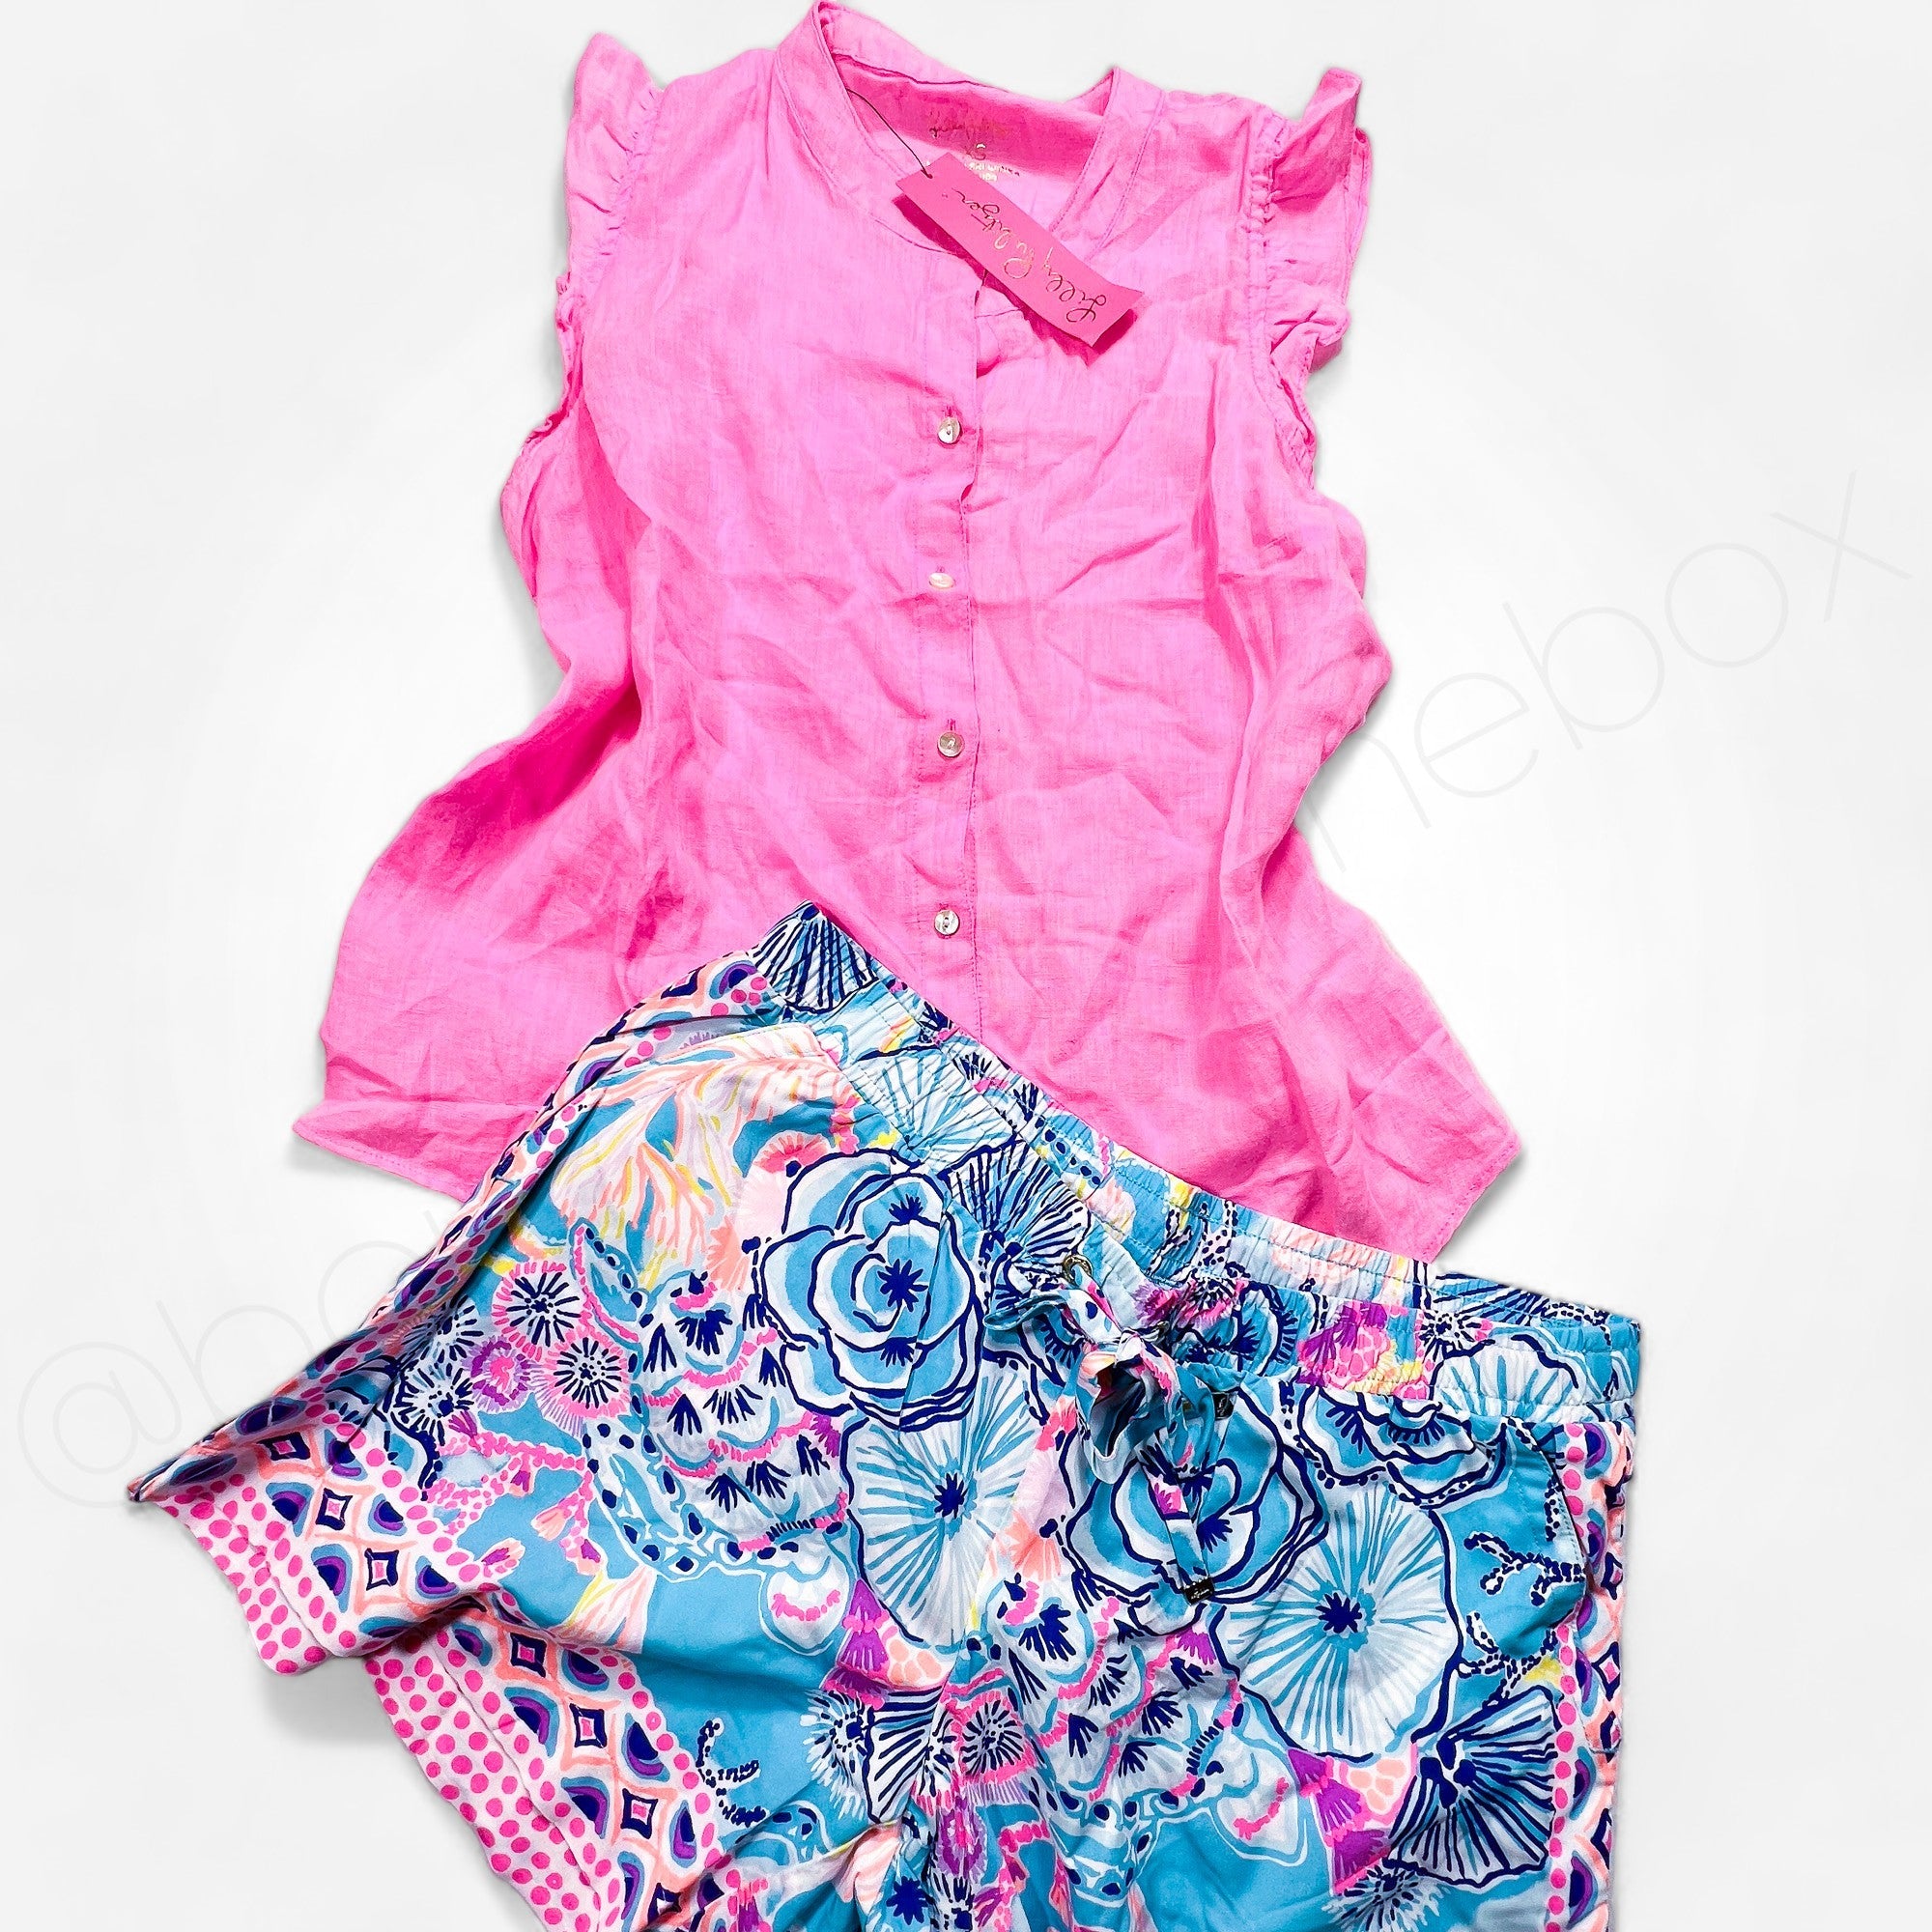 Lilly Pulitzer Women's New Wholesale Clothing - Boutique by the Box Wholesale for Resellers